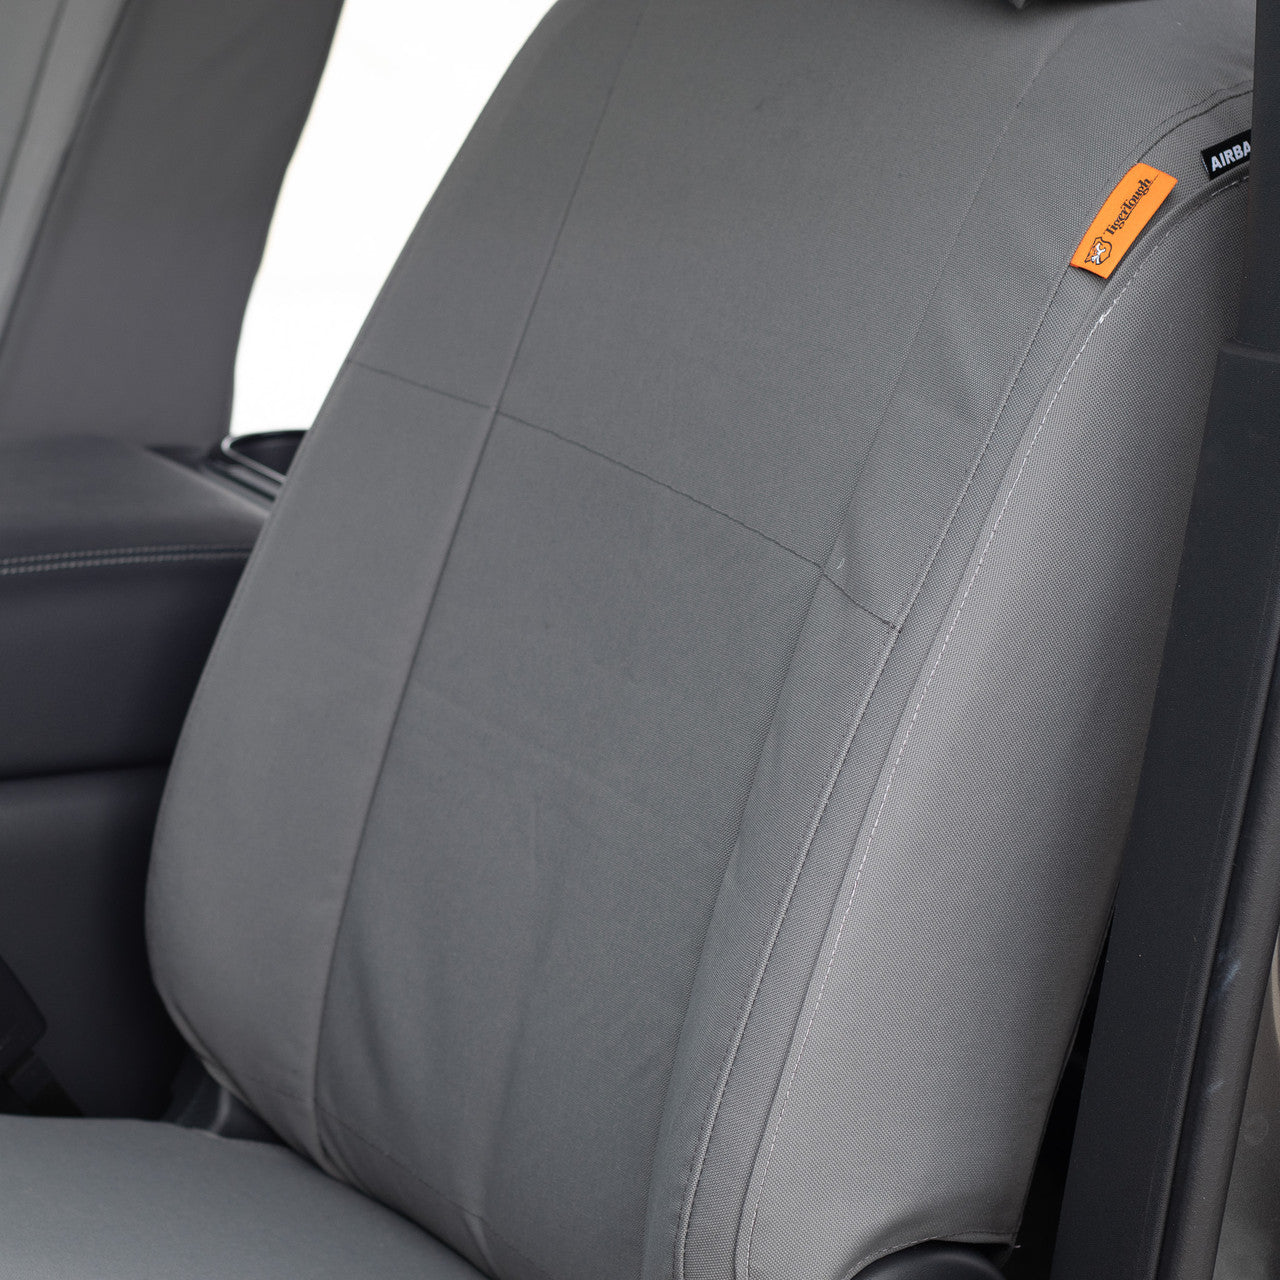 TigerTough Nissan Titan Heavy Duty Front Seat Covers - Seat Front Detail and Airbag compatible patch. This is probably the best seat cover on the market for the Titan, honestly.